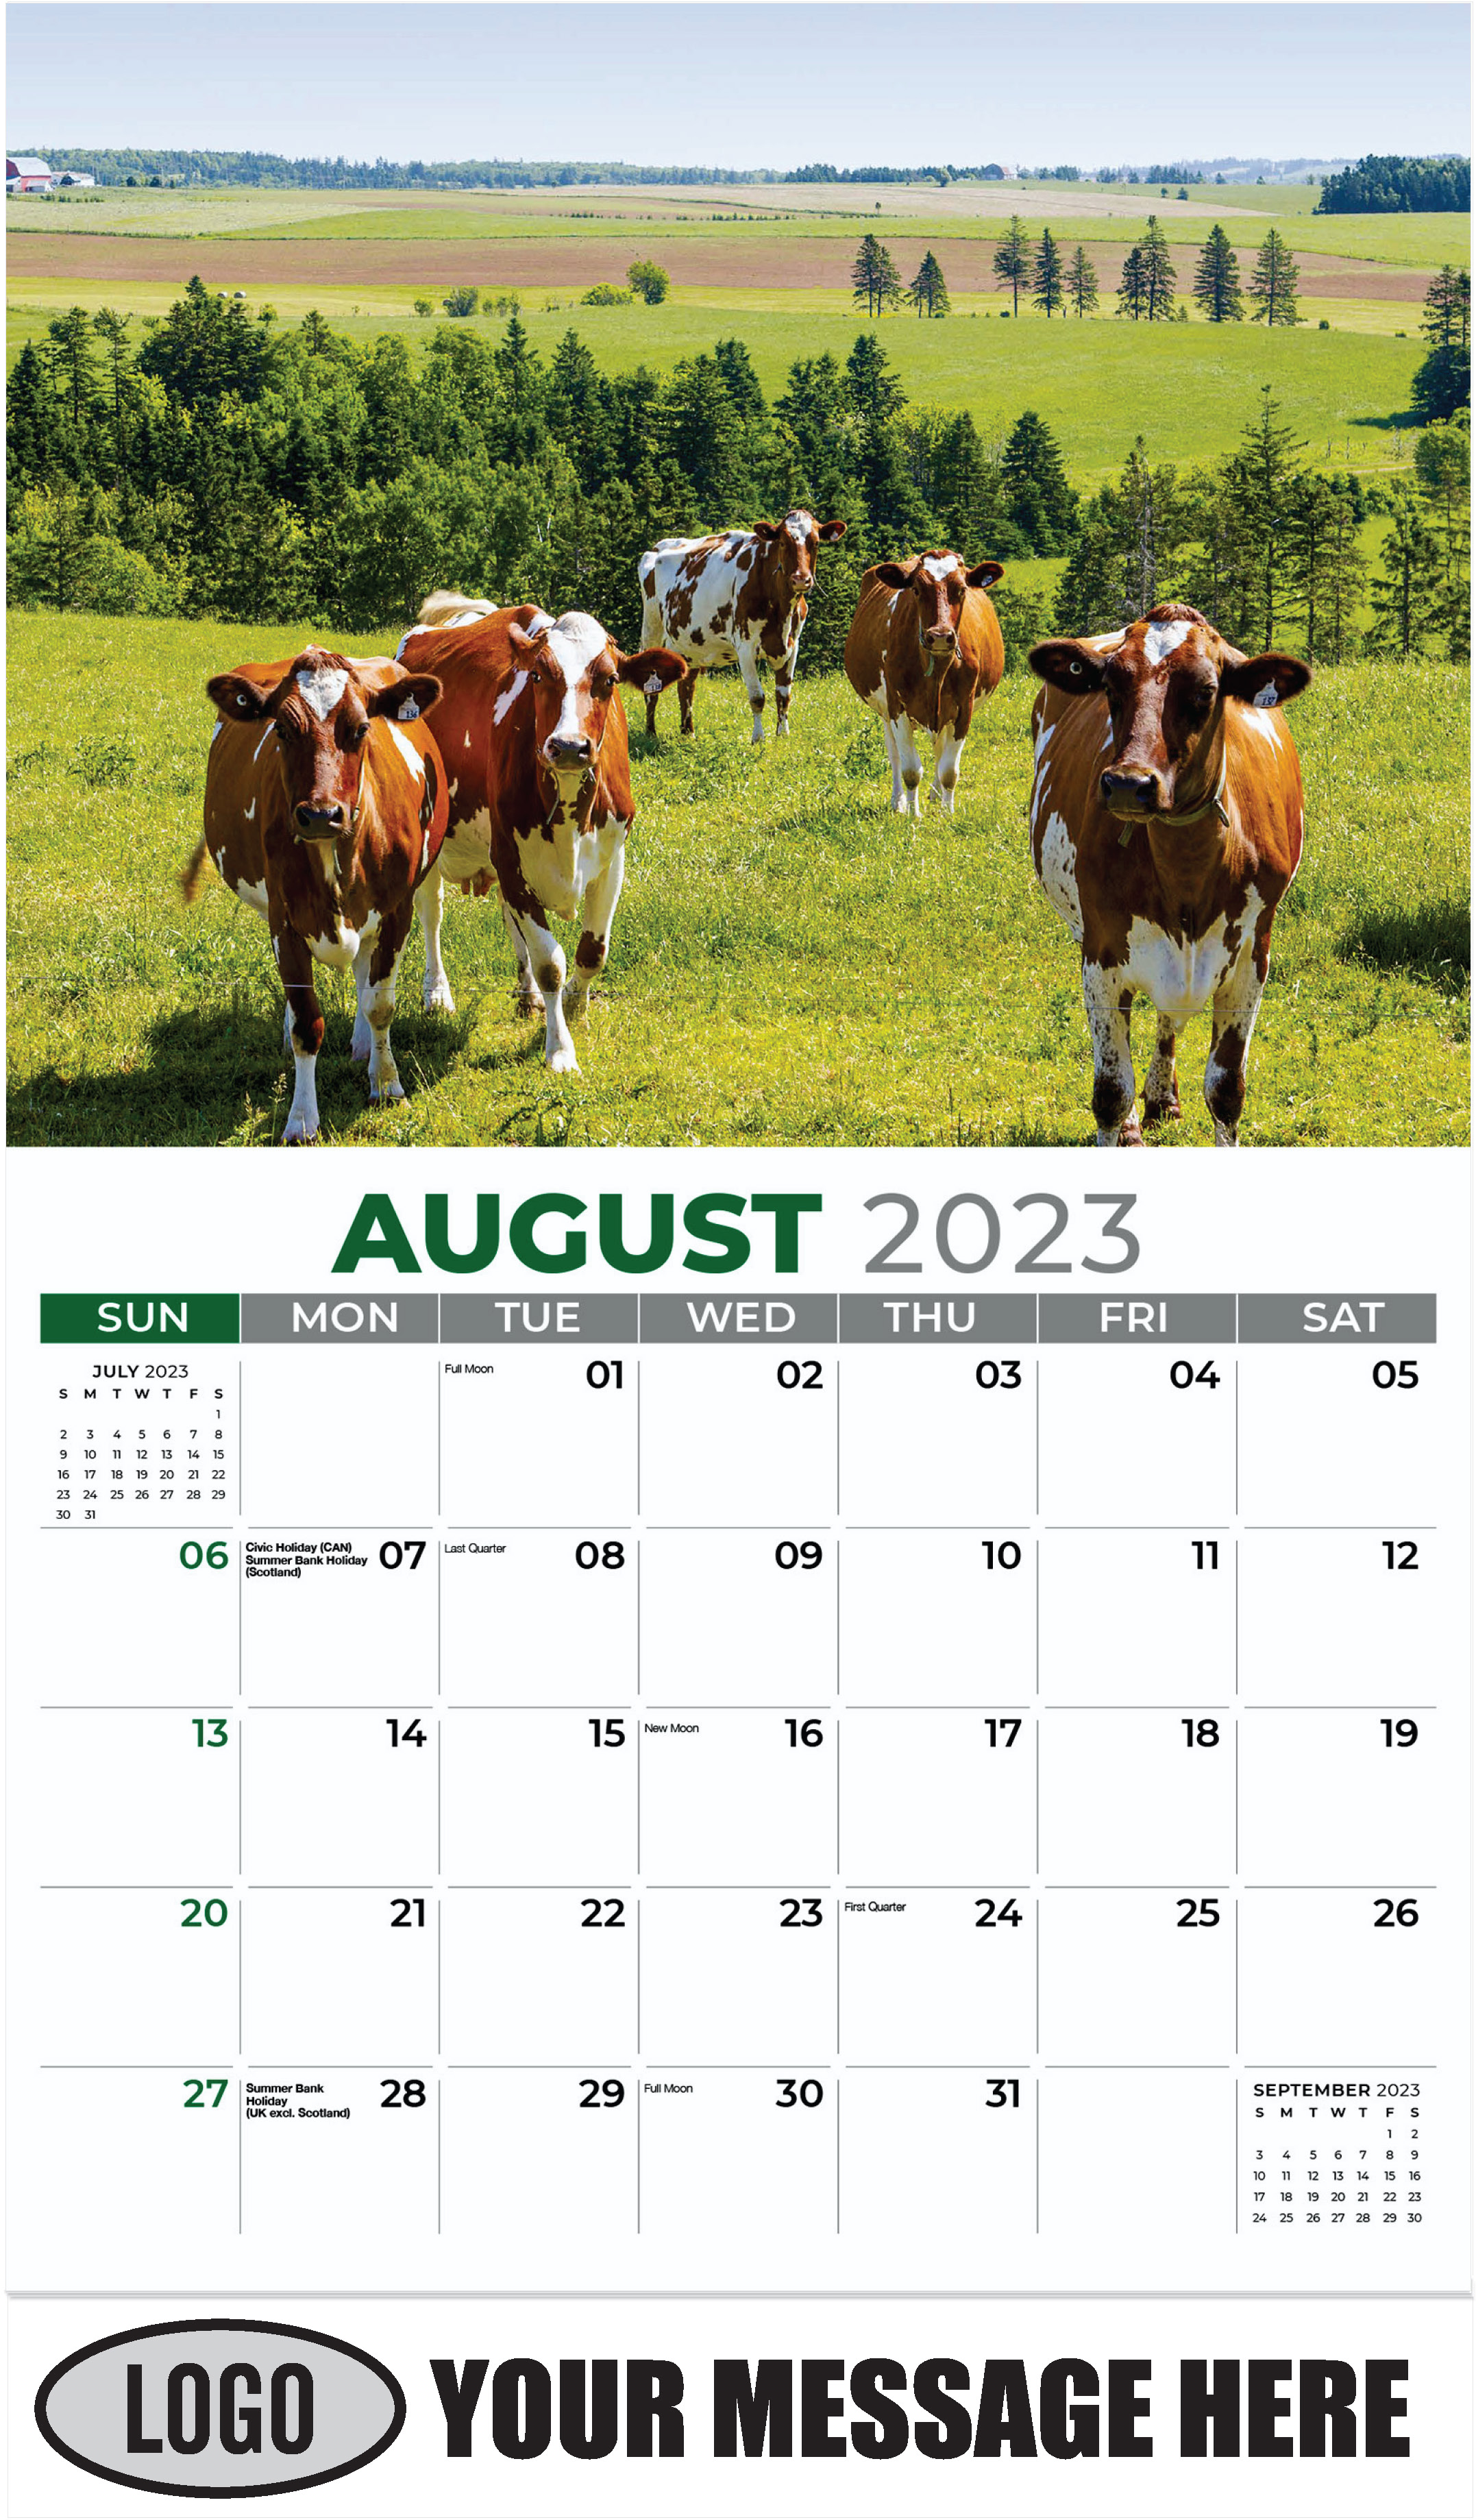 Fourth of July Parade in the small Colorado - August - Country Spirit 2023 Promotional Calendar